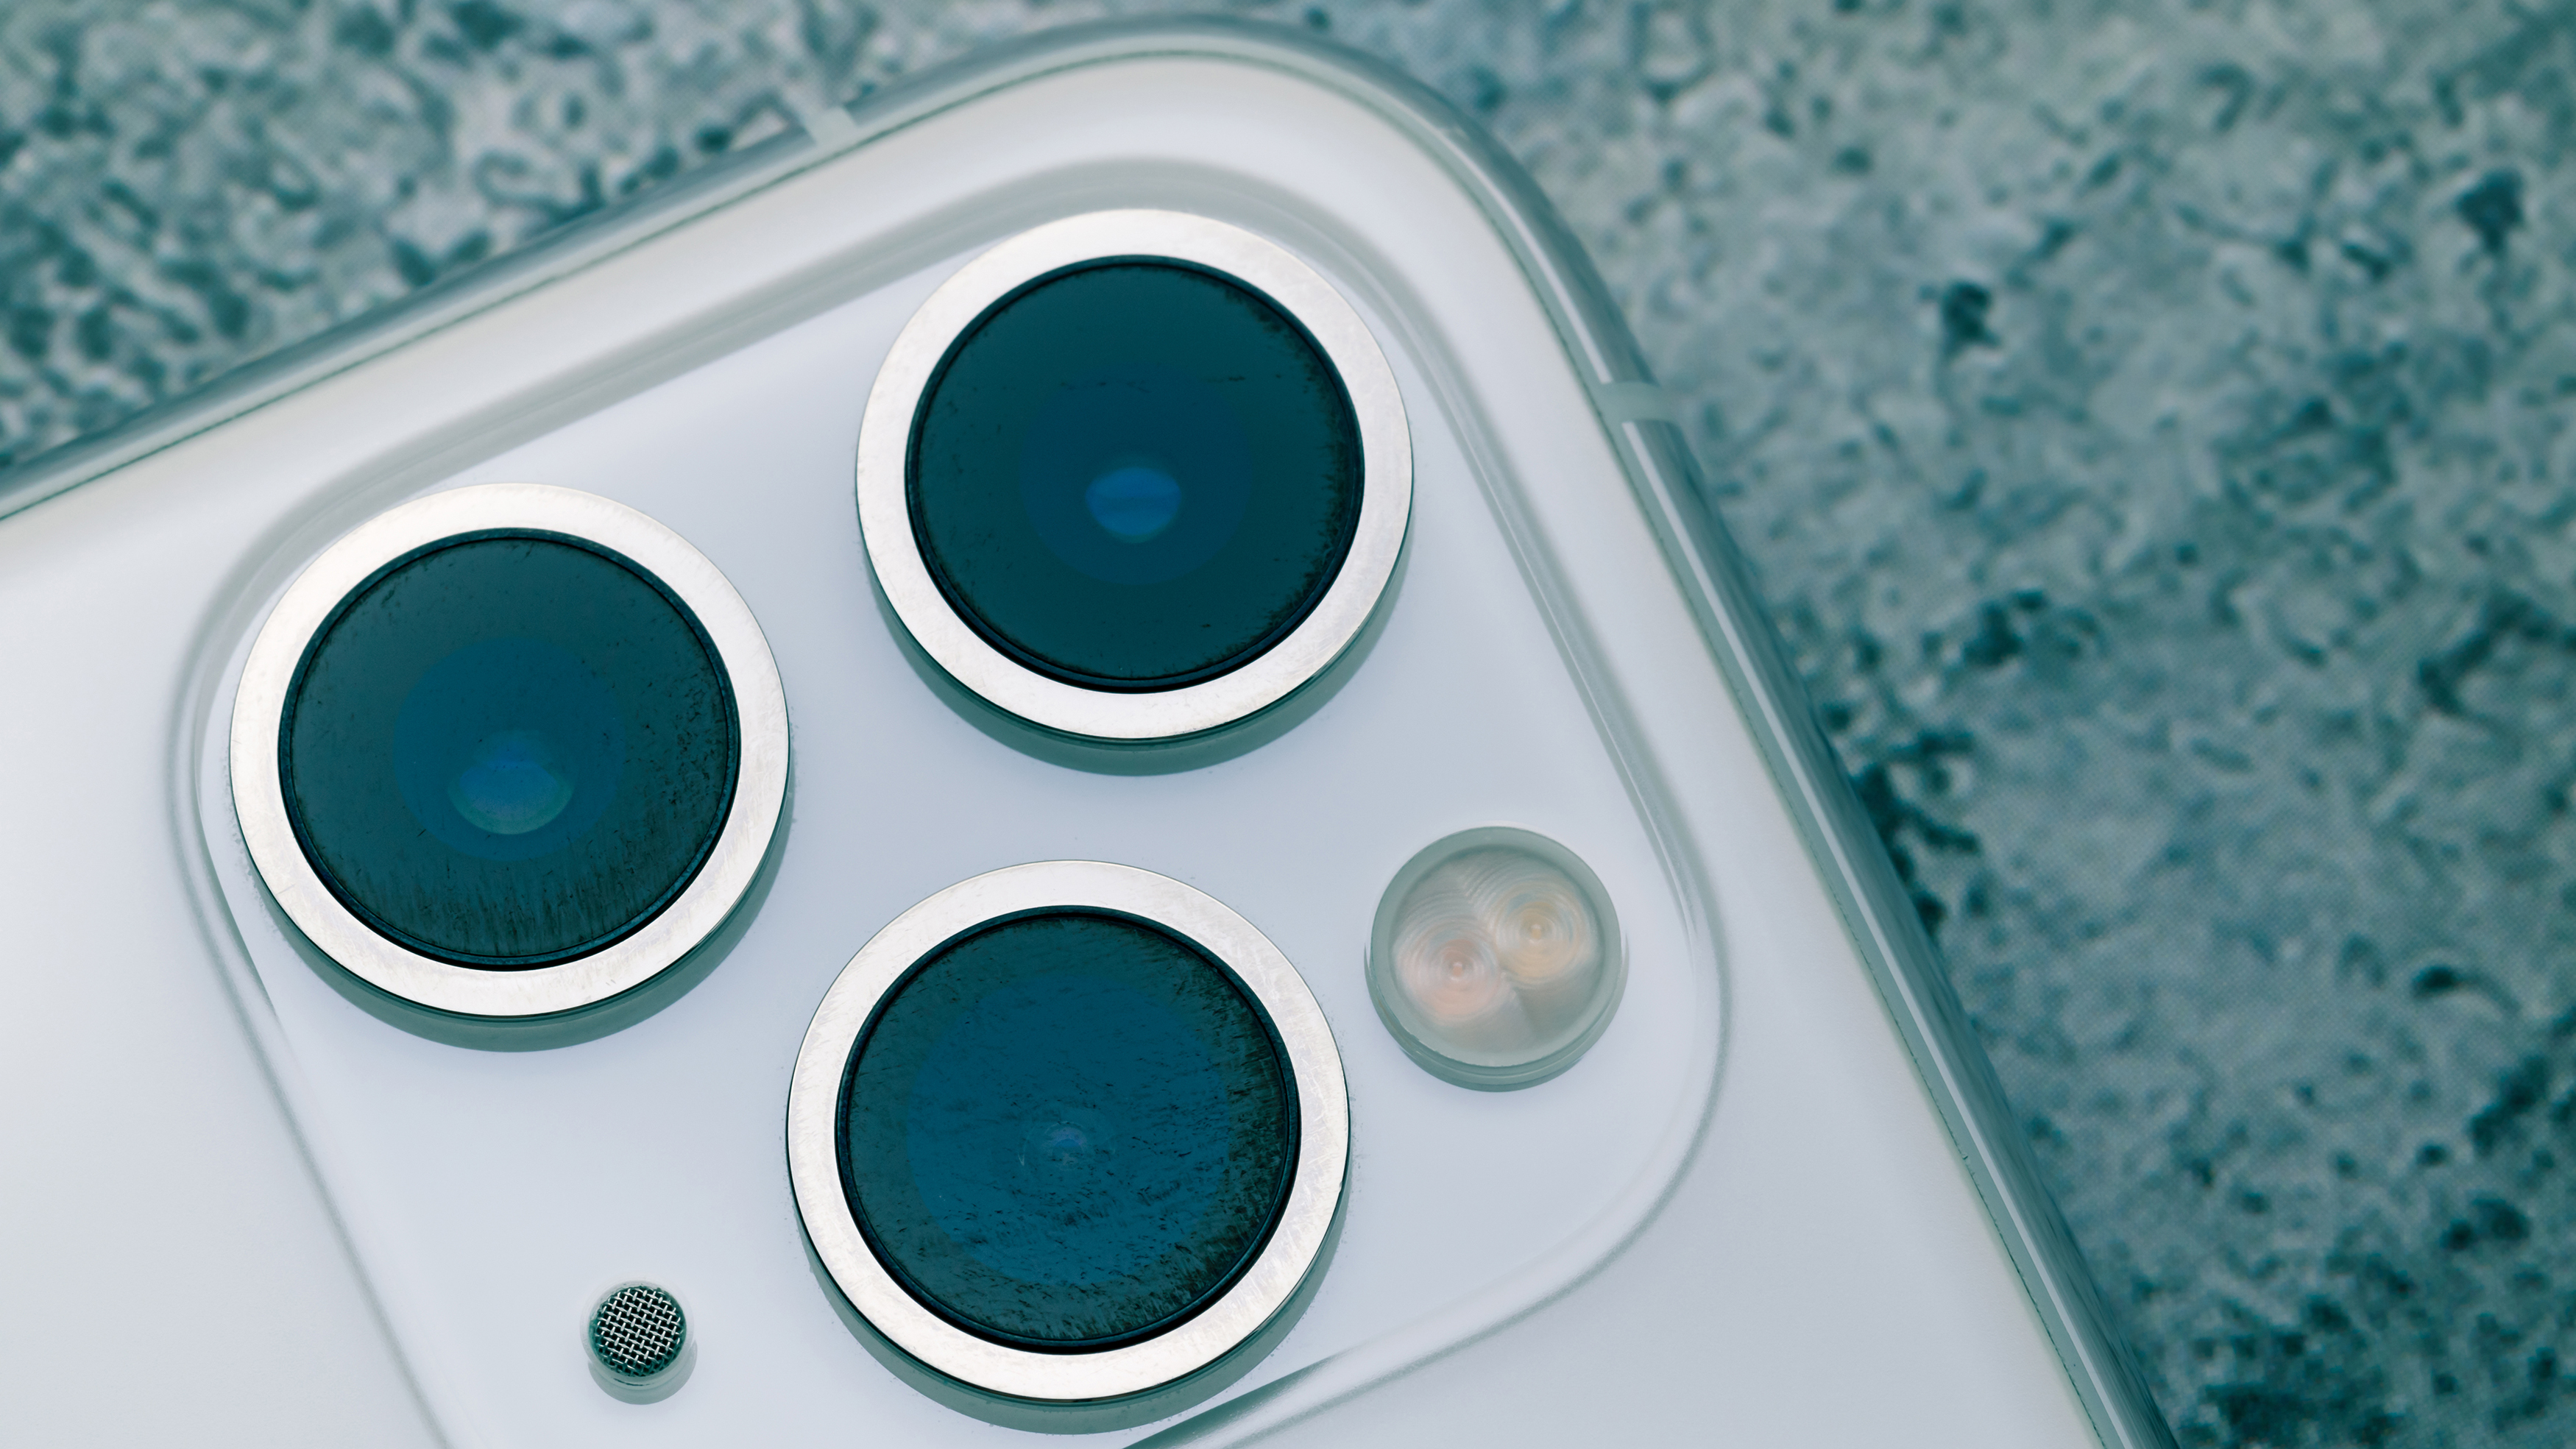 The three lenses of a smartphone camera